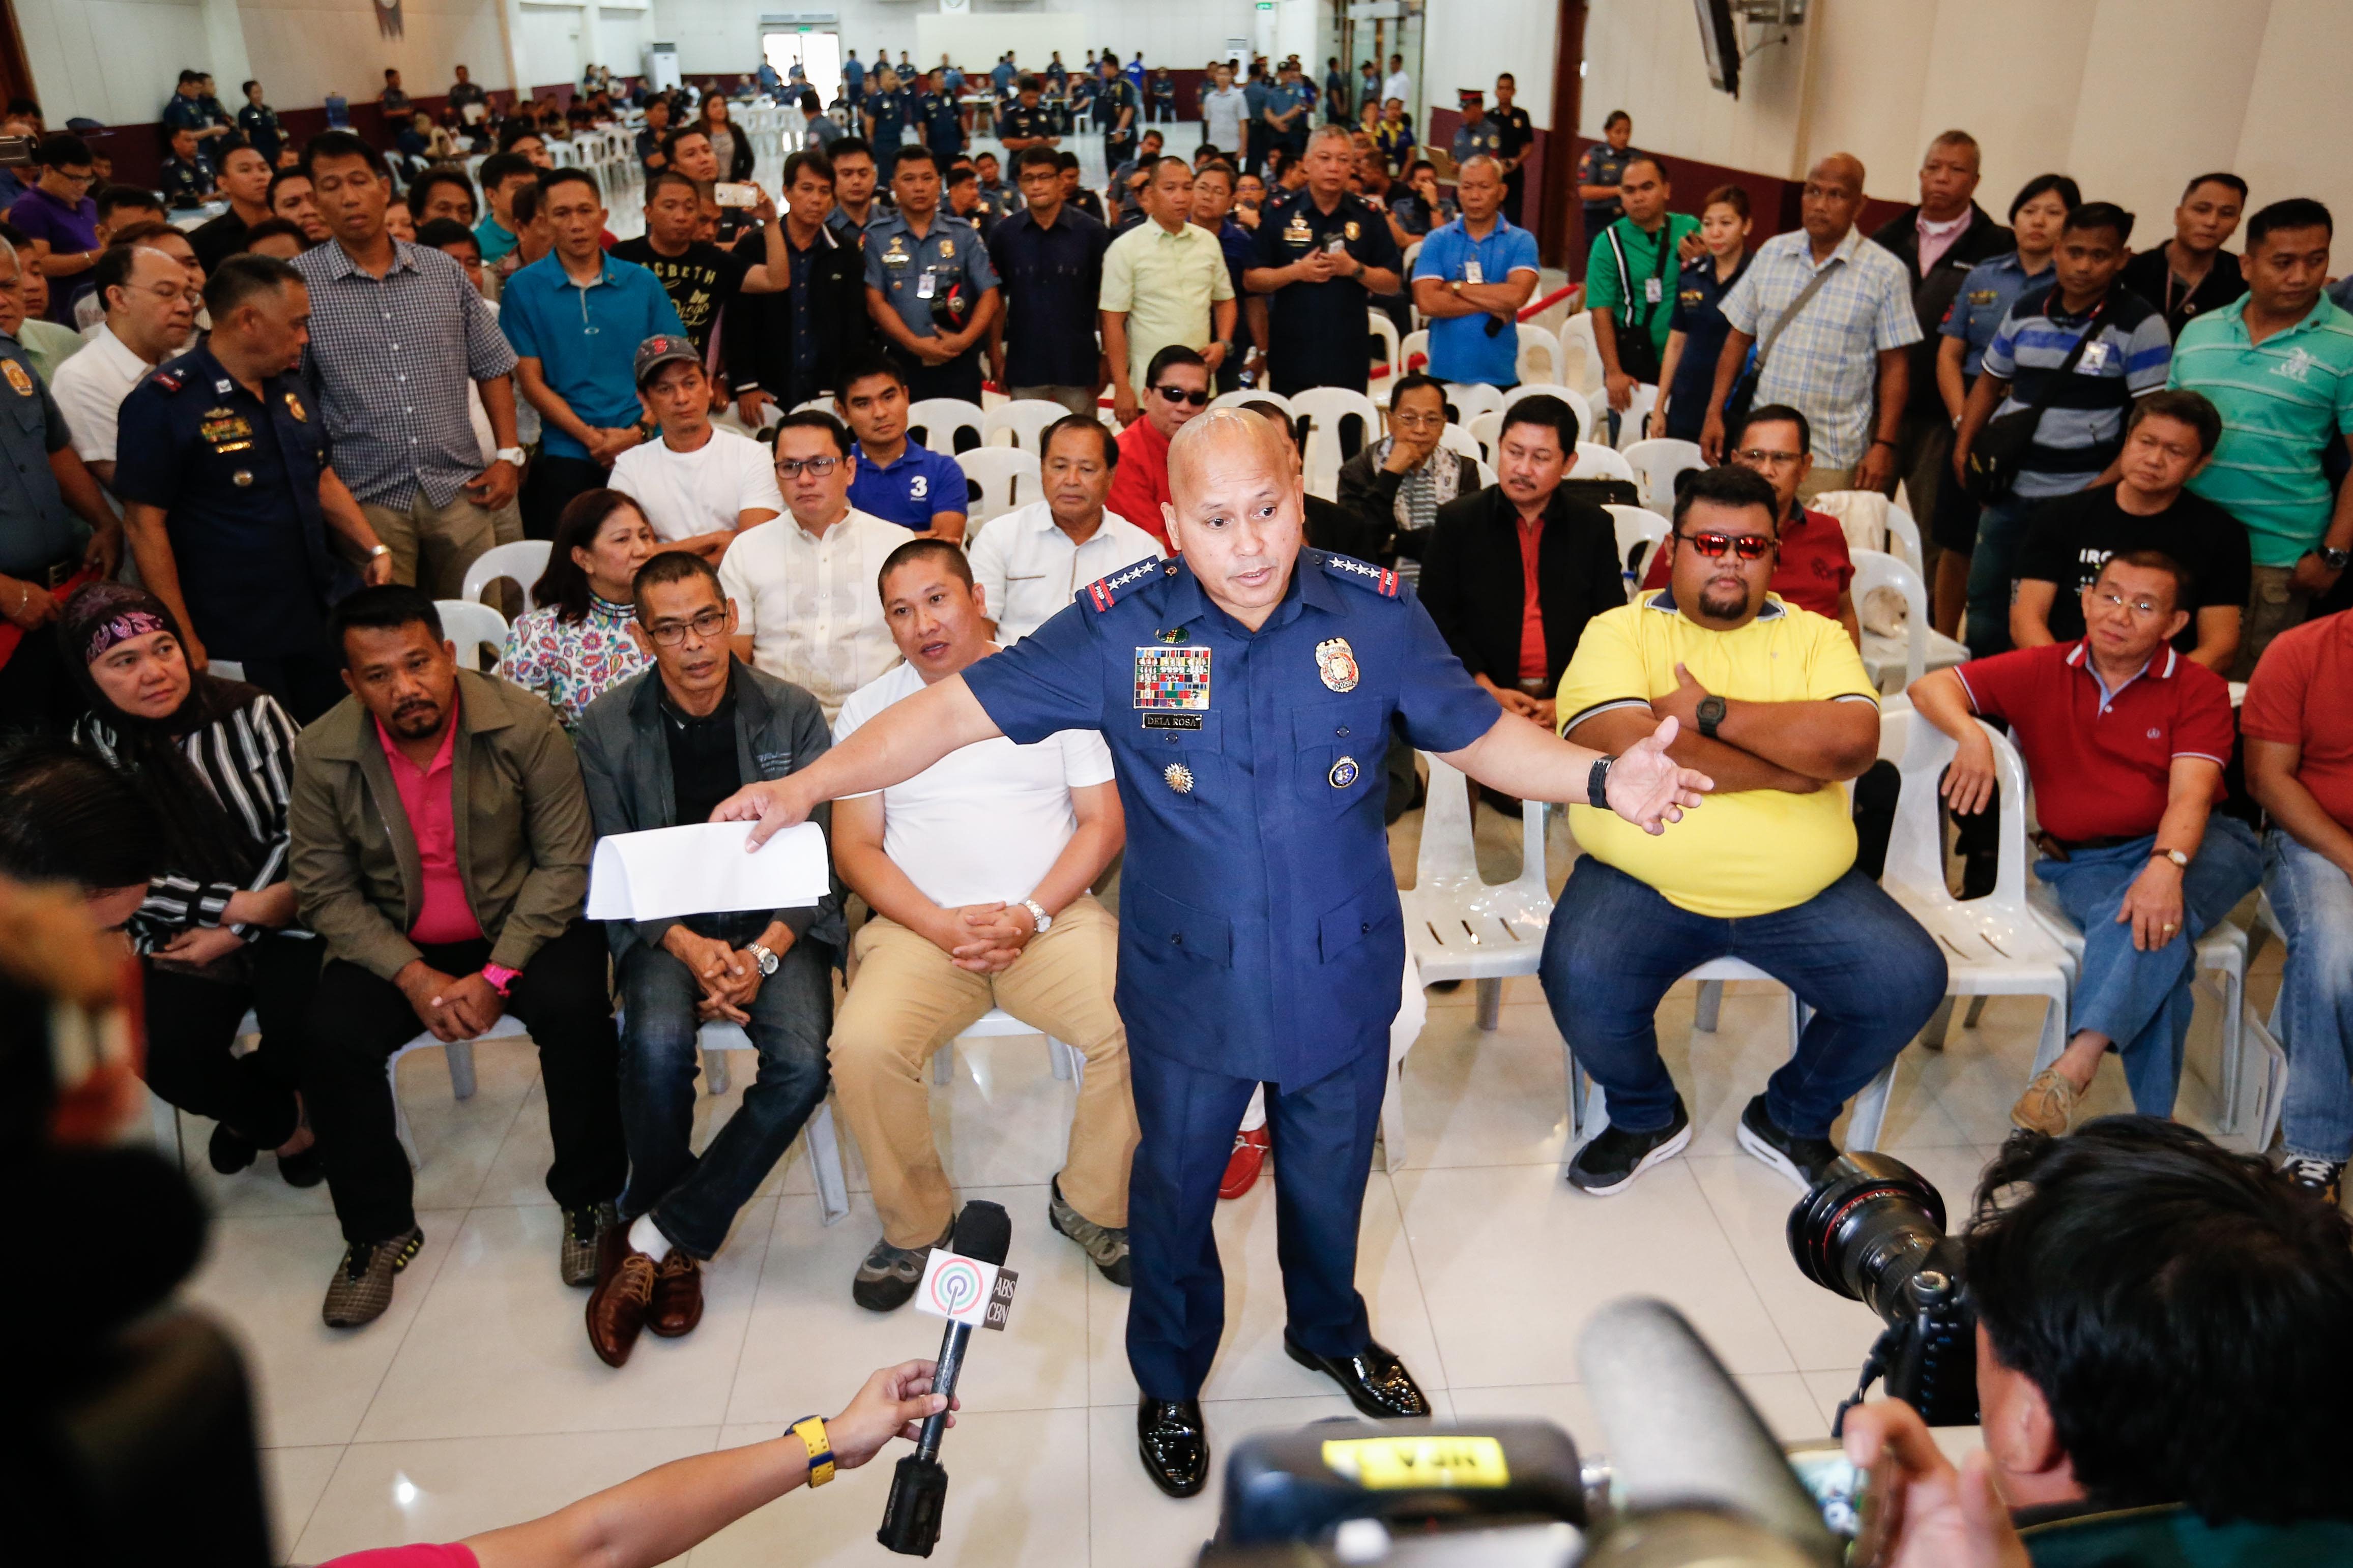 VOLUNTARY SURRENDER. PNP Chief Director General Ronald Dela Rosa presents local officials allegedly involved in the illegal drug trade after they have voluntarily surrendered at Camp Crame in Quezon City on August 8, 2016. EPA/MARK R. CRISTINO 